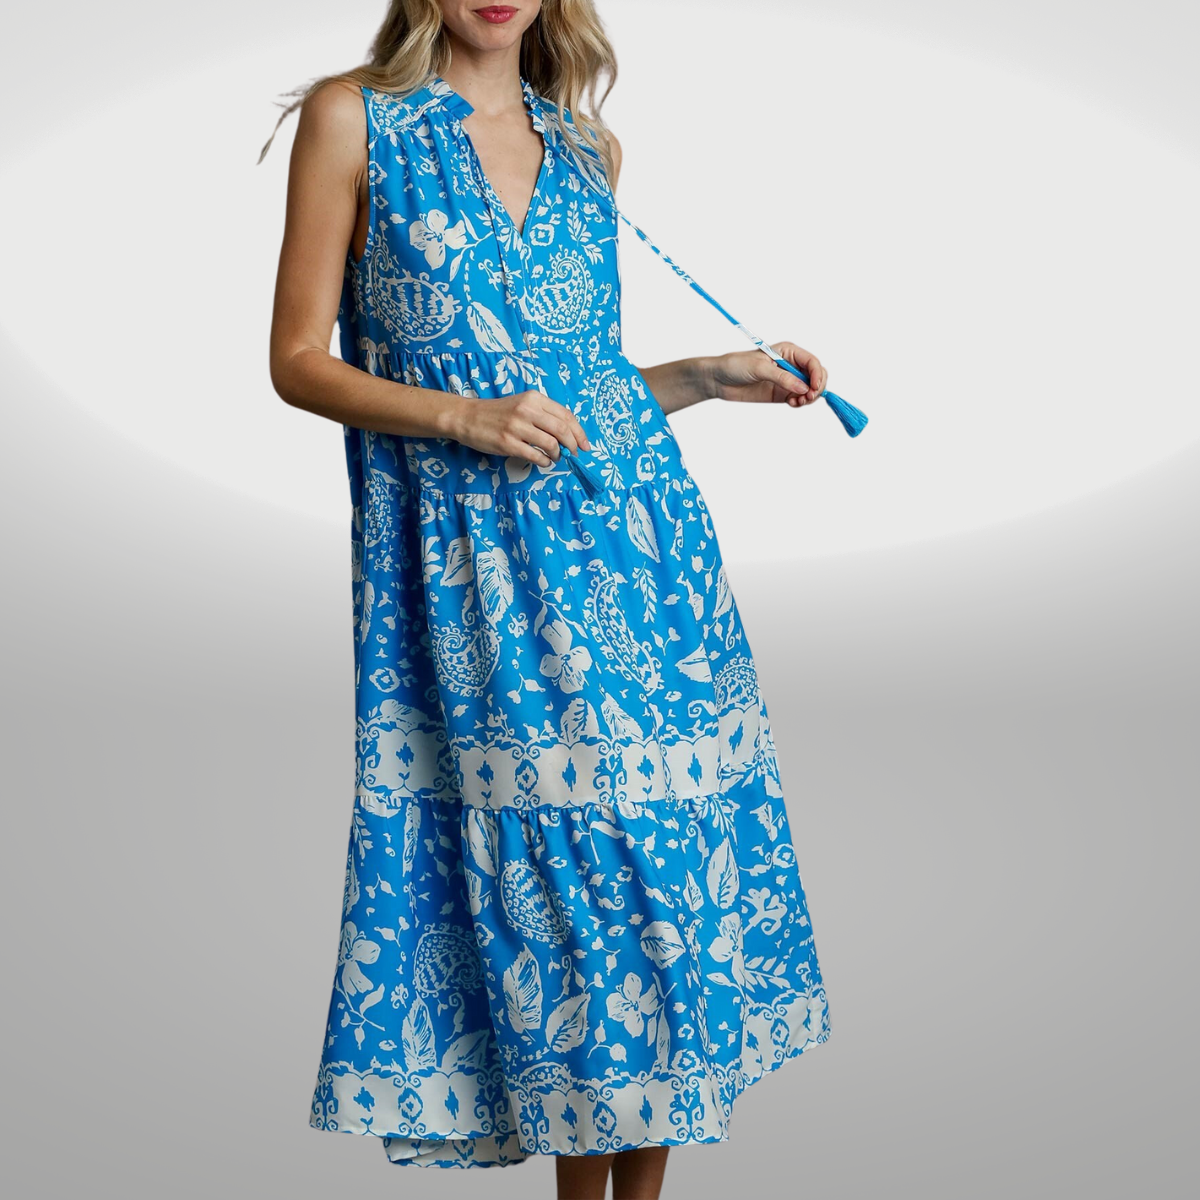 A woman wearing a FASHION GO blue and white floral sleeveless midi dress with a spring print.